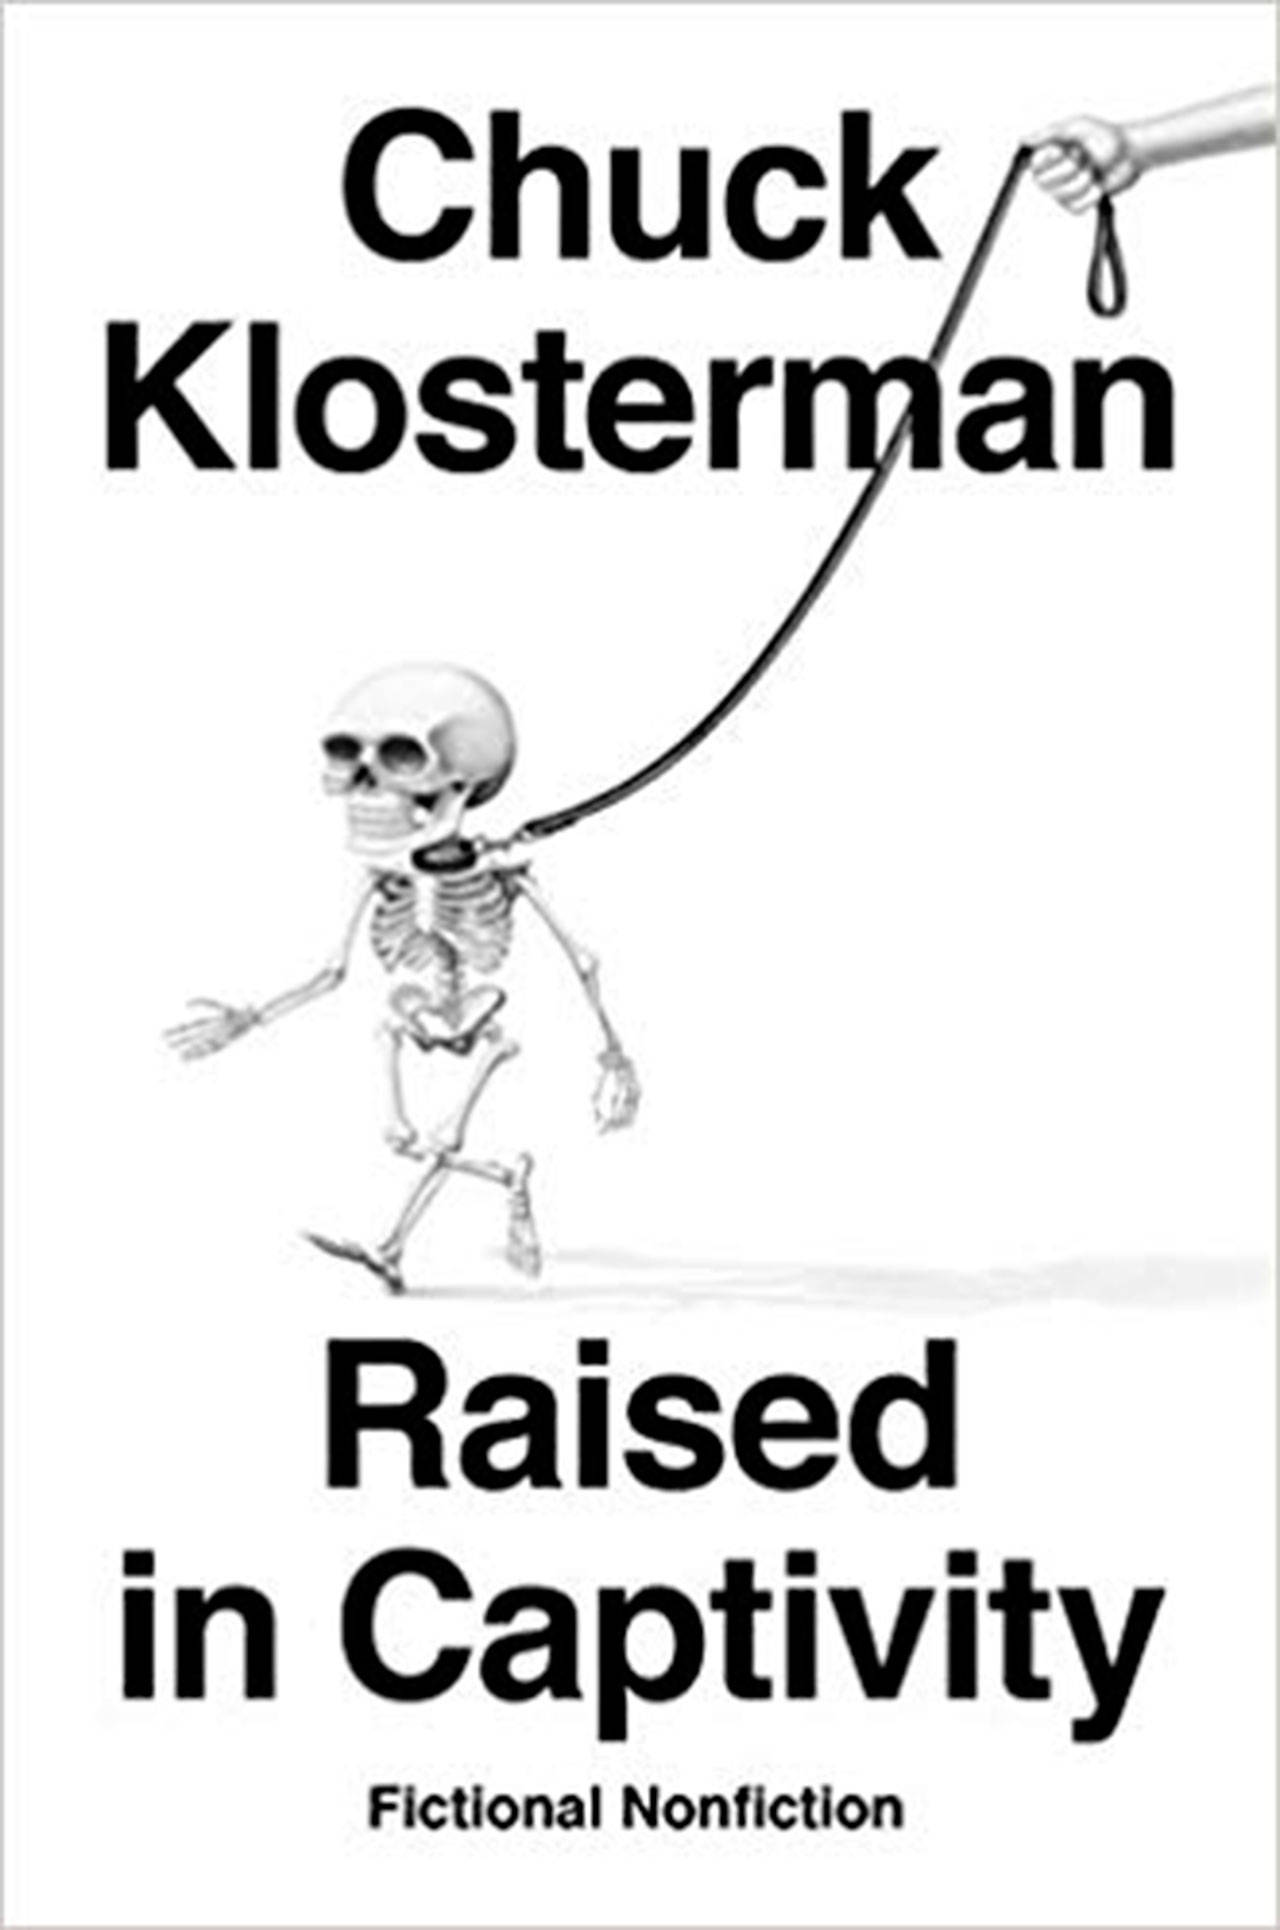 ”Raised in Captivity: Fictional Nonfiction” by Chuck Klosterman